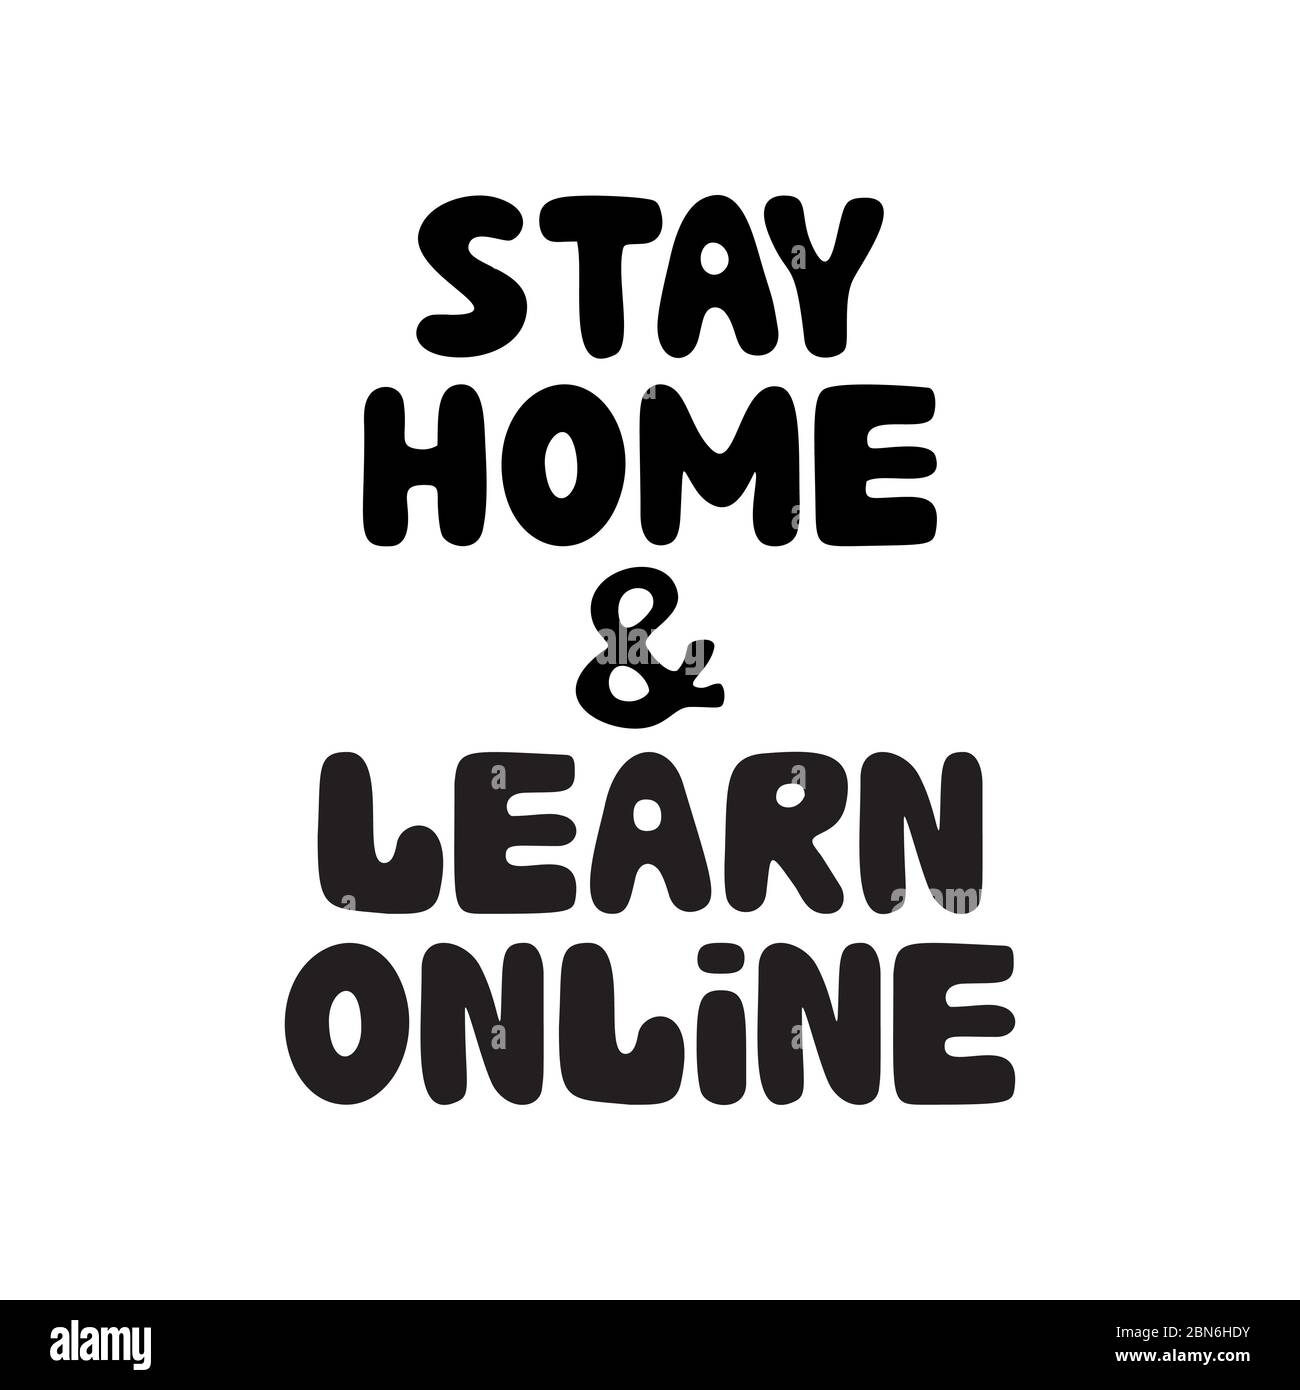 Stay home and learn online. Cute hand drawn doodle bubble lettering. Isolated on white background. Vector stock illustration. Stock Vector